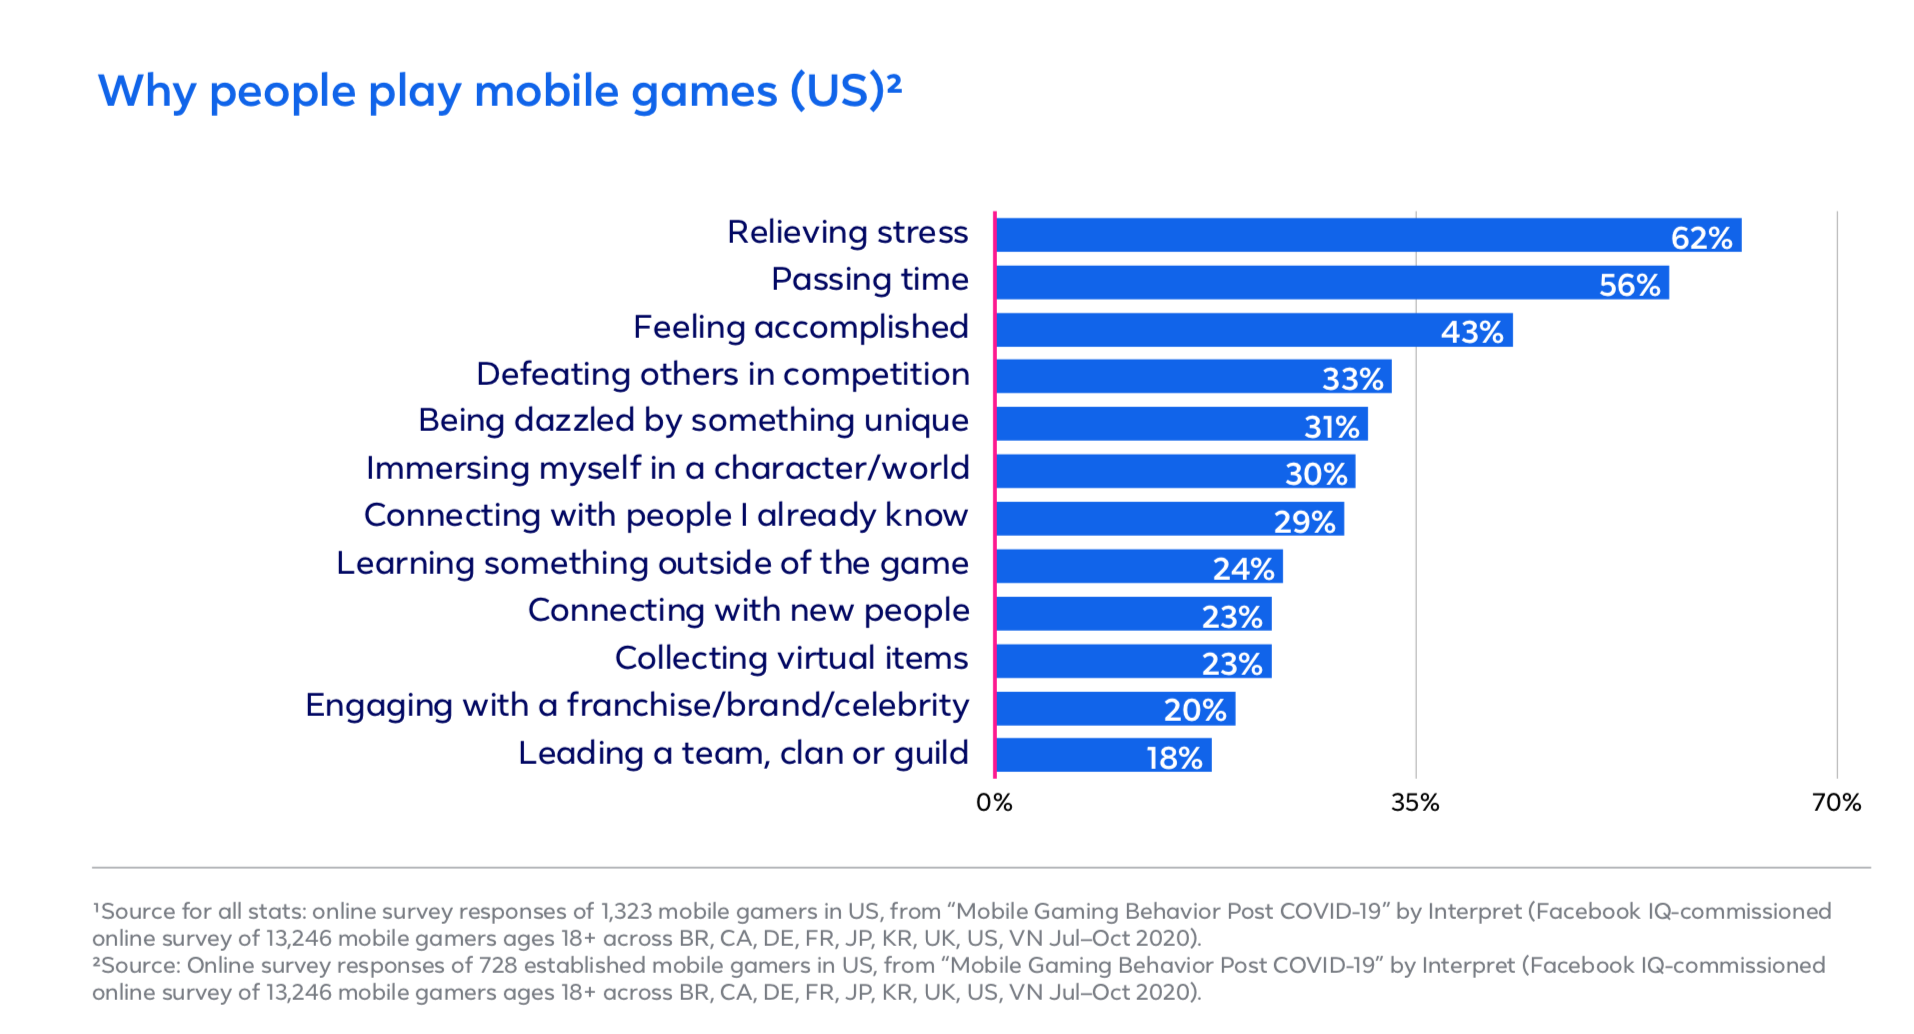 Why people play mobile games in the US